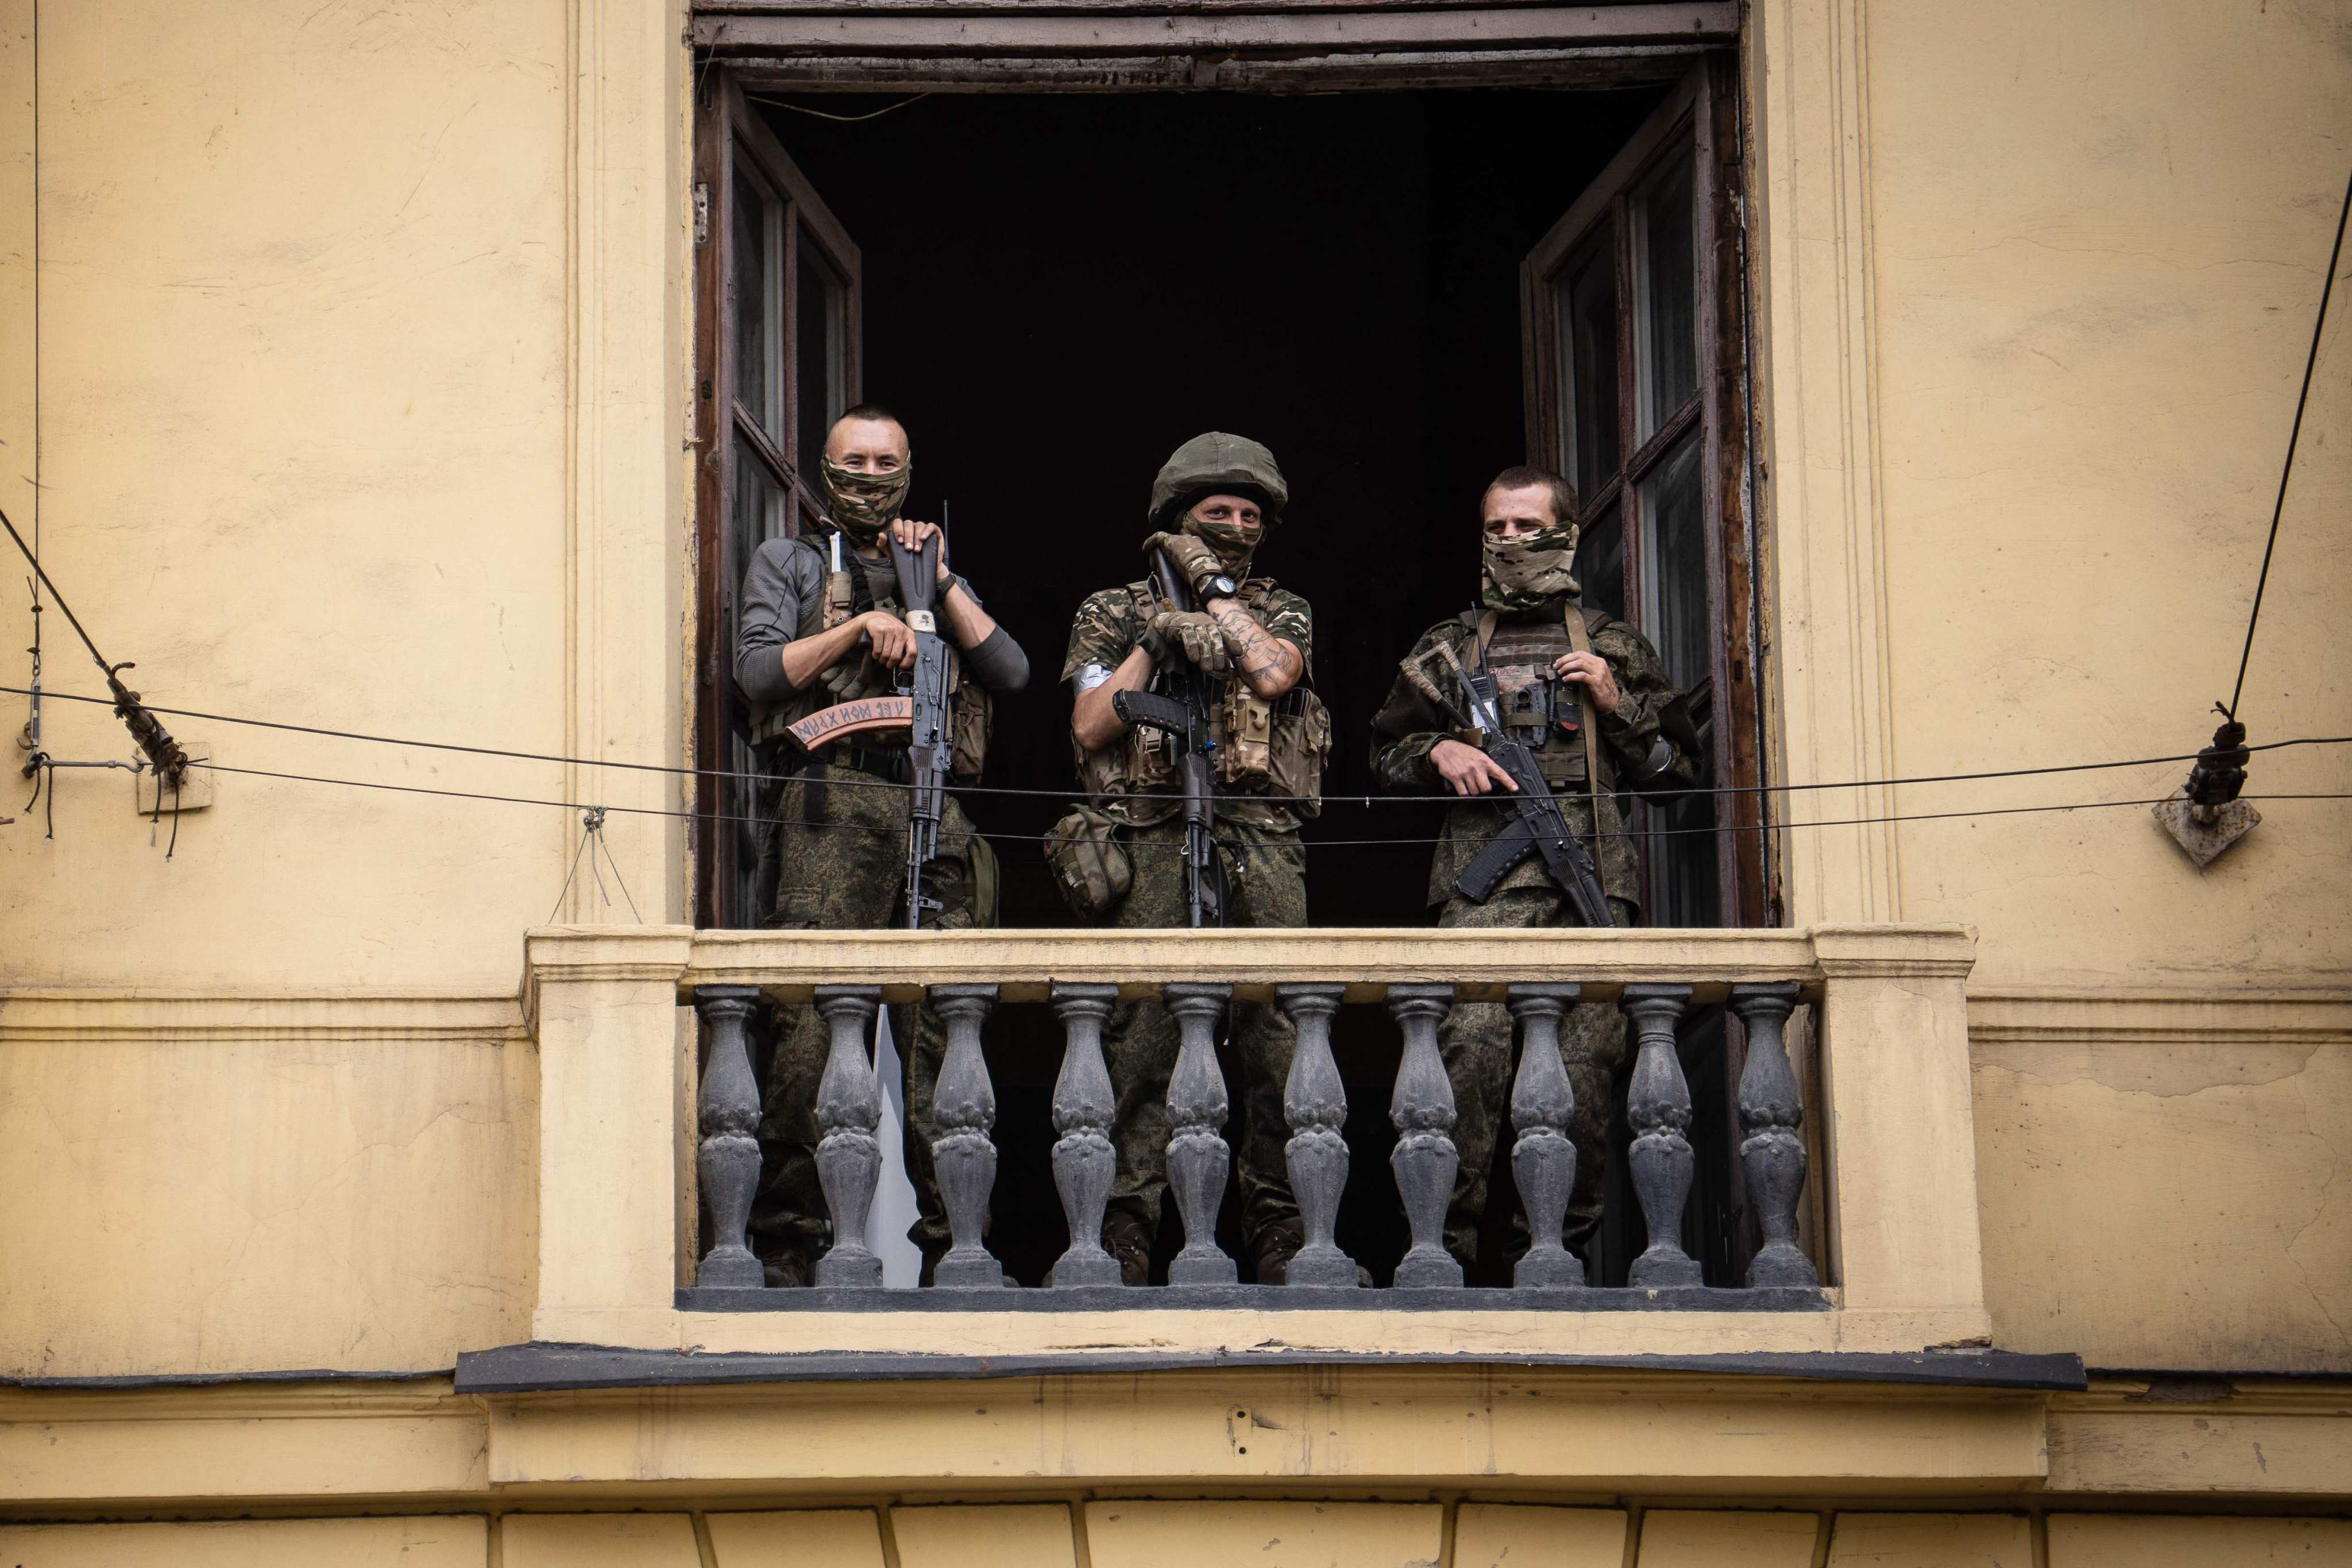 Members of the Wagner group stand on the balcony of the circus building in Rostov-on-Don, Russia, on June 24.  Yevgeny Prigozhin, commander of the mercenary group, had ordered his troops to march on Moscow but abruptly reached a deal with the Kremlin to go into exile and sounded the retreat on June 25. Photo: AFP